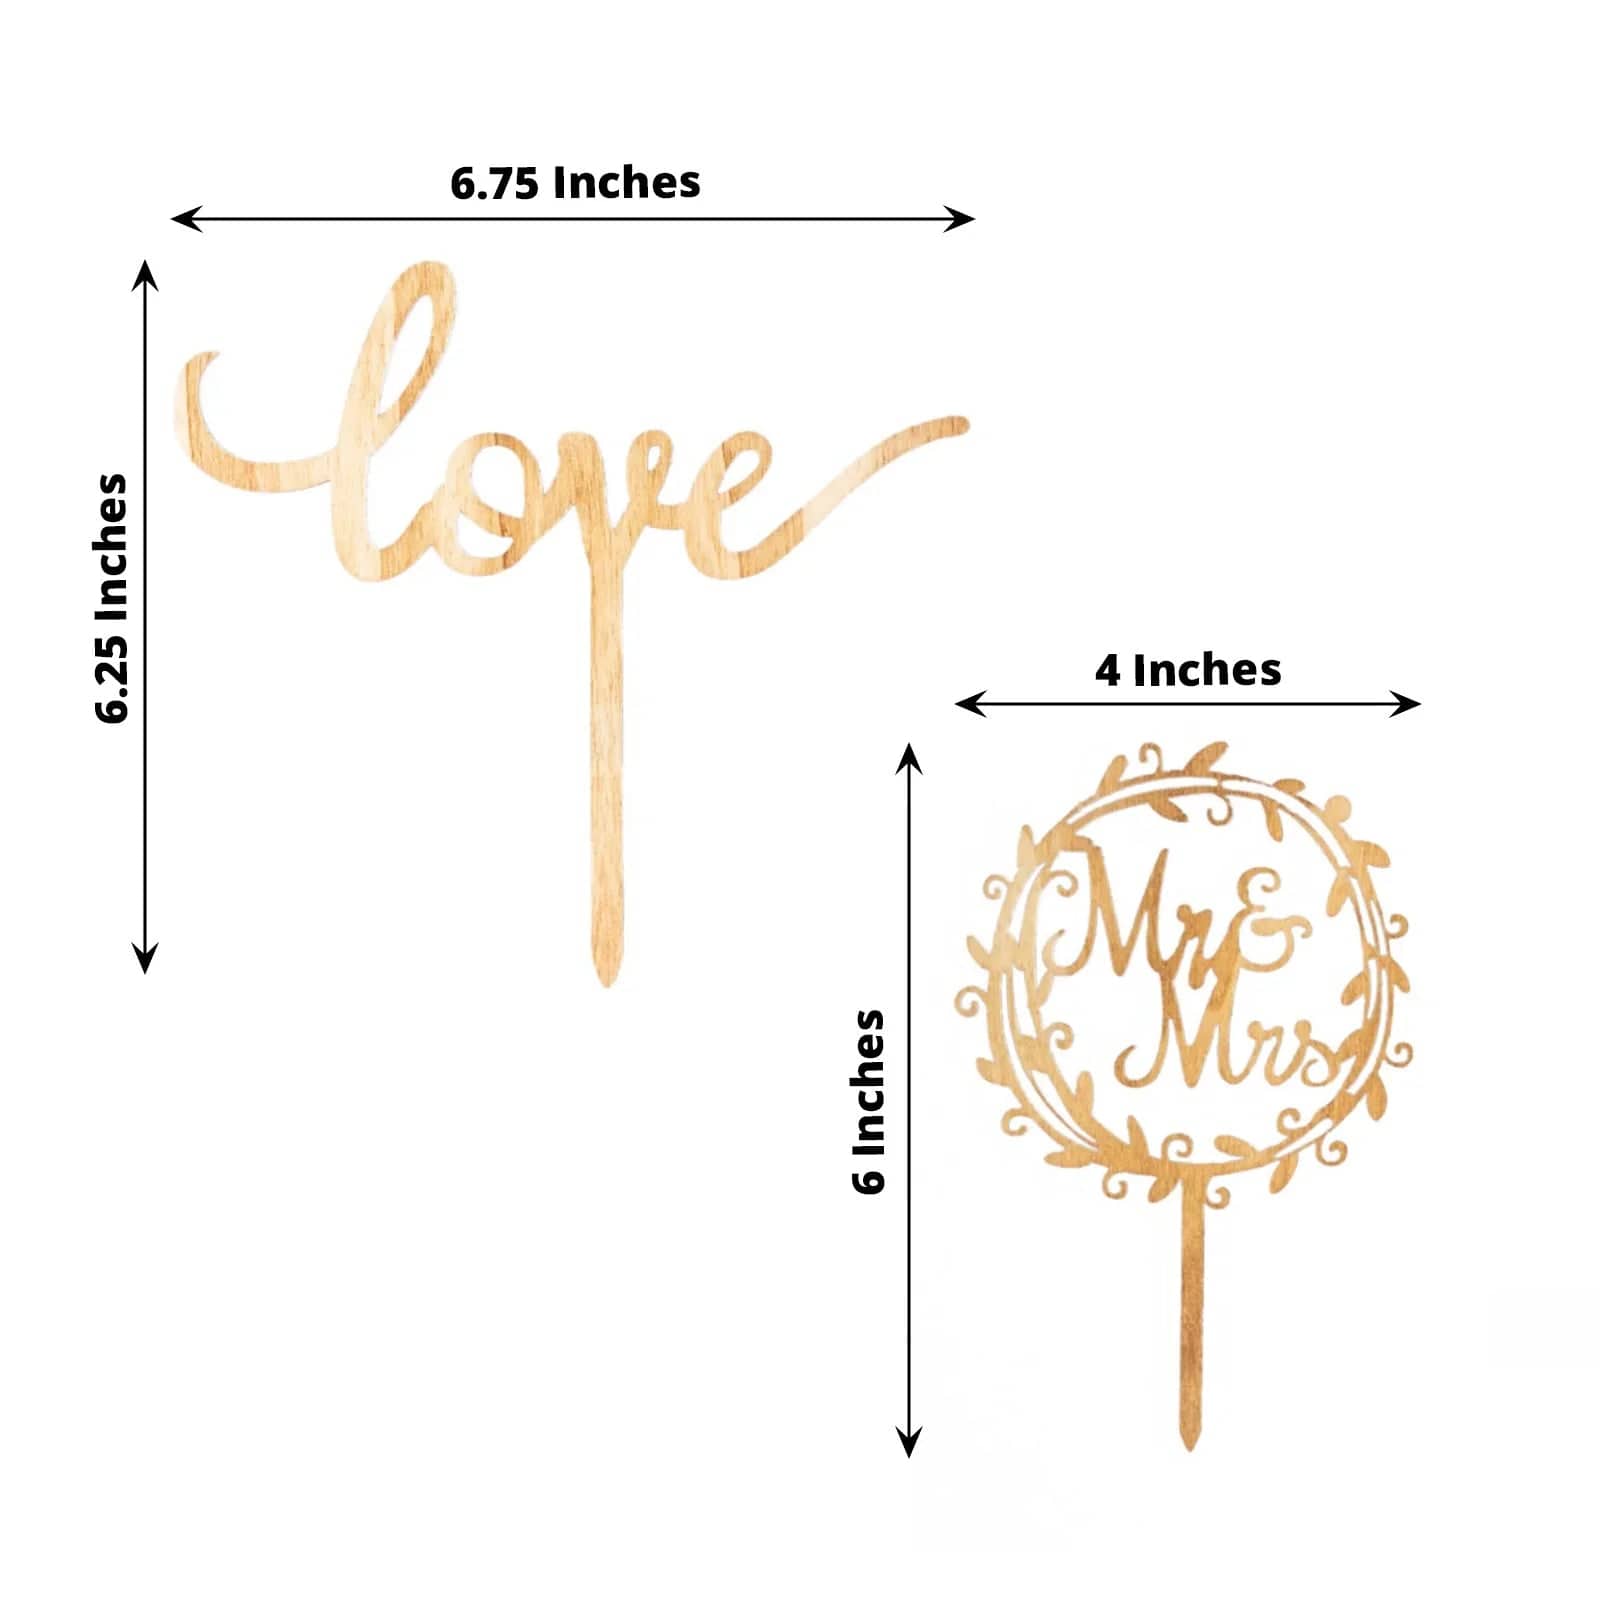 2 Natural Wooden Love and Mr & Mrs Wedding Cake Toppers